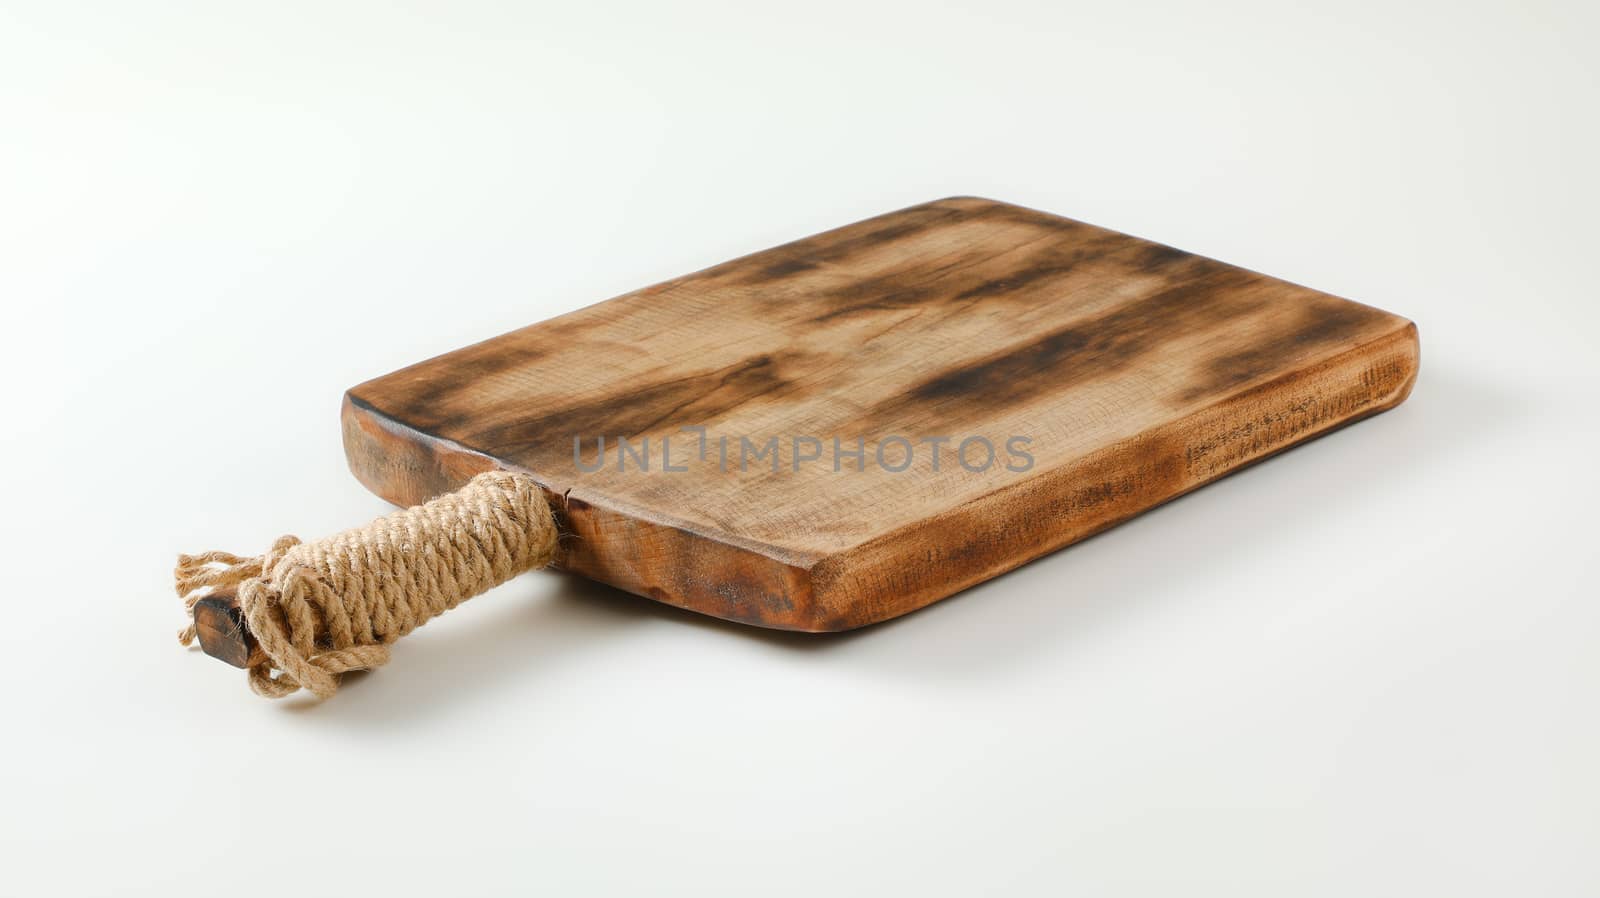 Rustic wooden cutting board or serving tray by Digifoodstock